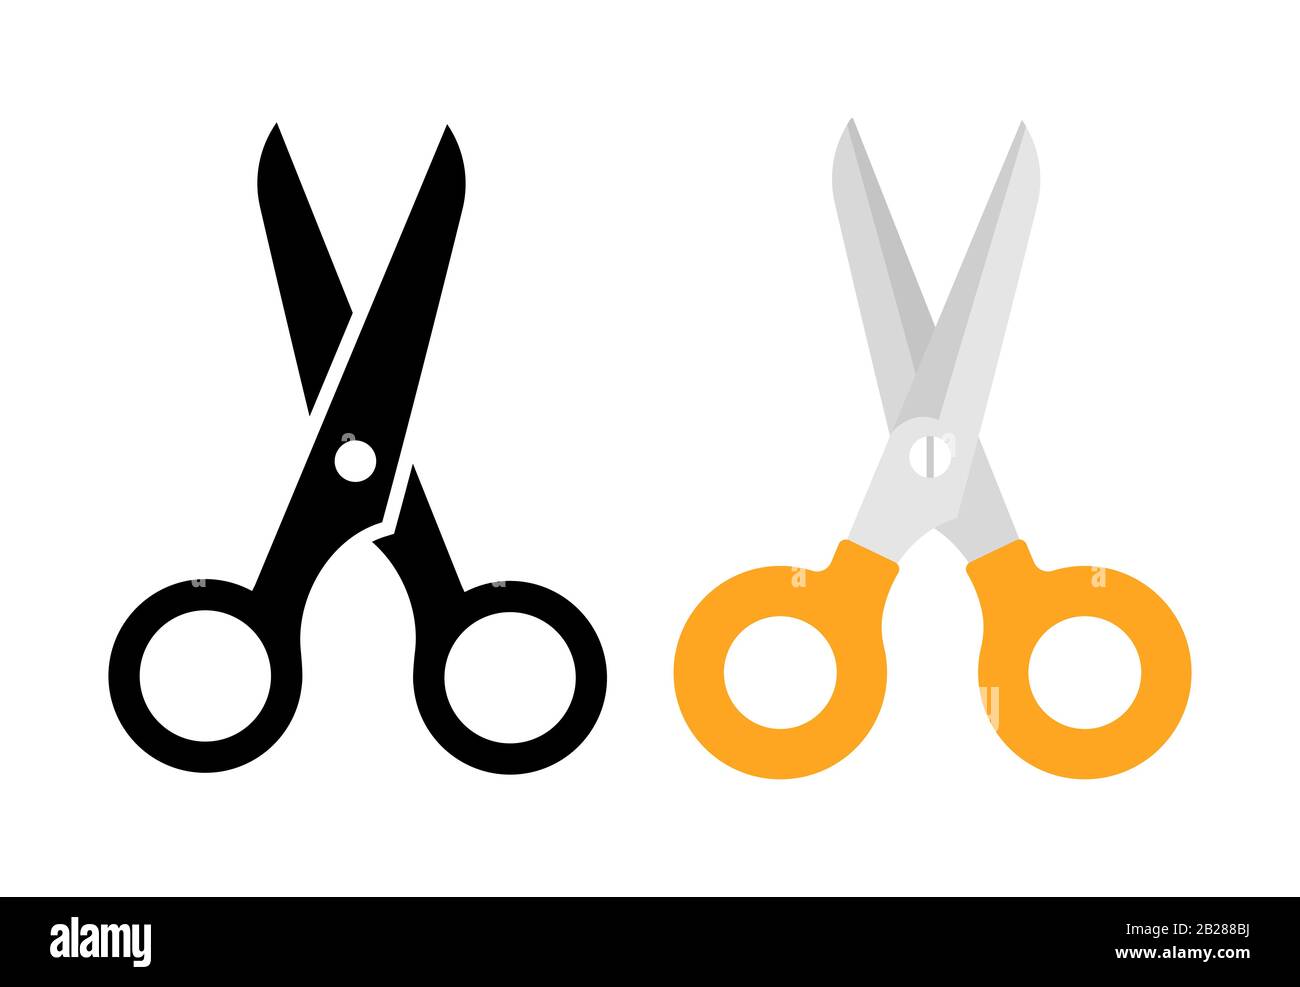 Scissors black and flat icon on white background Stock Vector